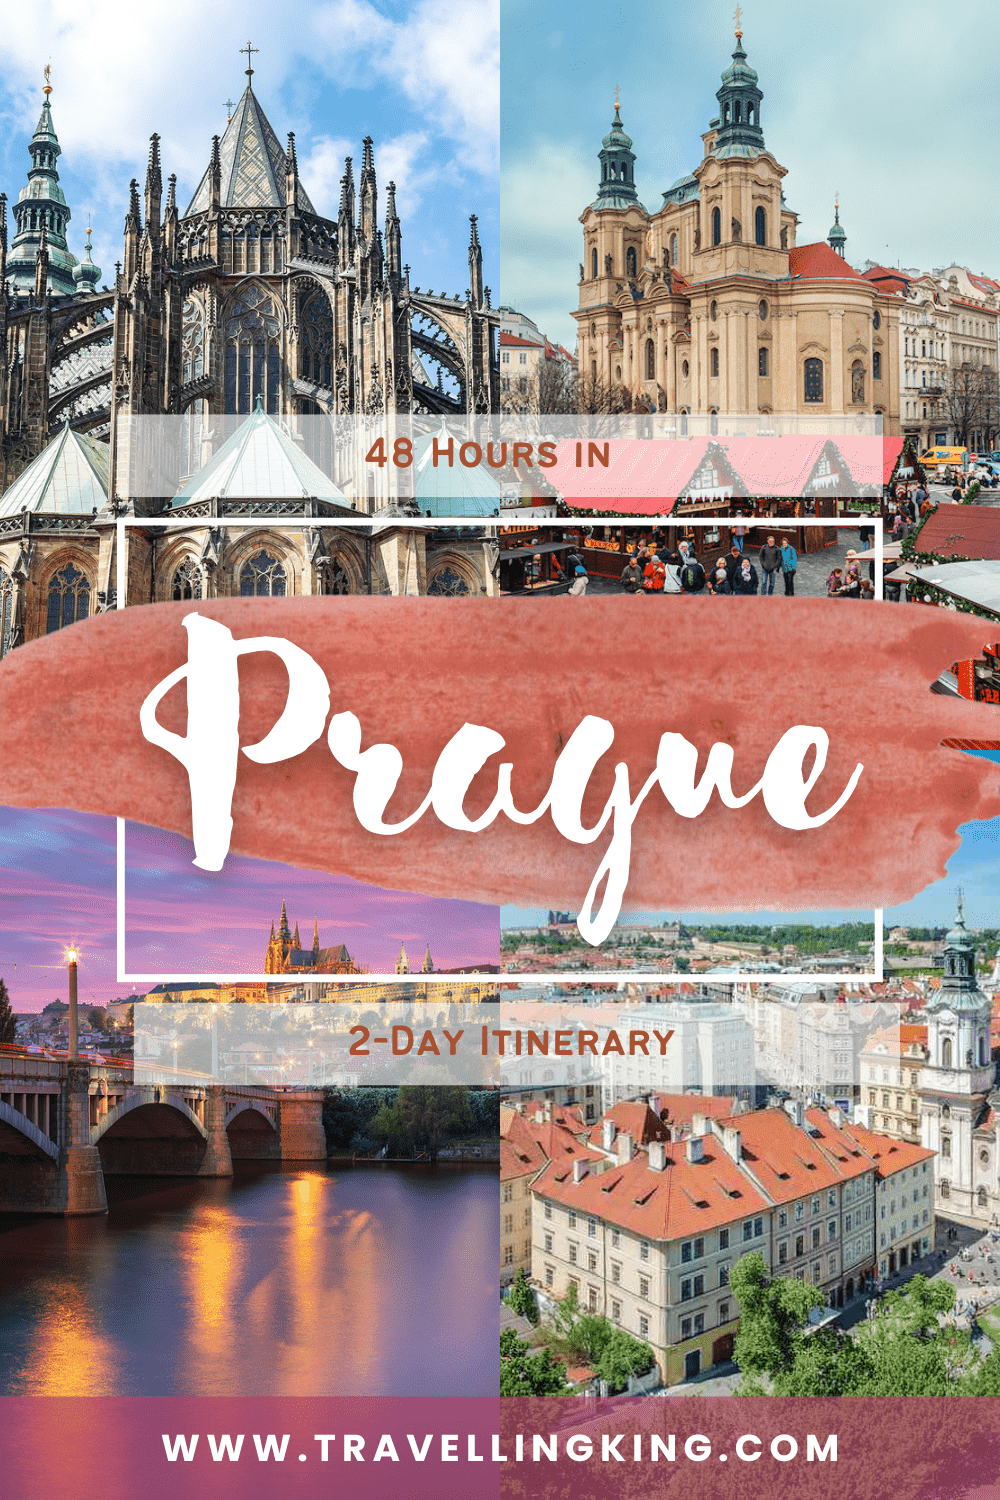 48 Hours in Prague - 2 Day Itinerary